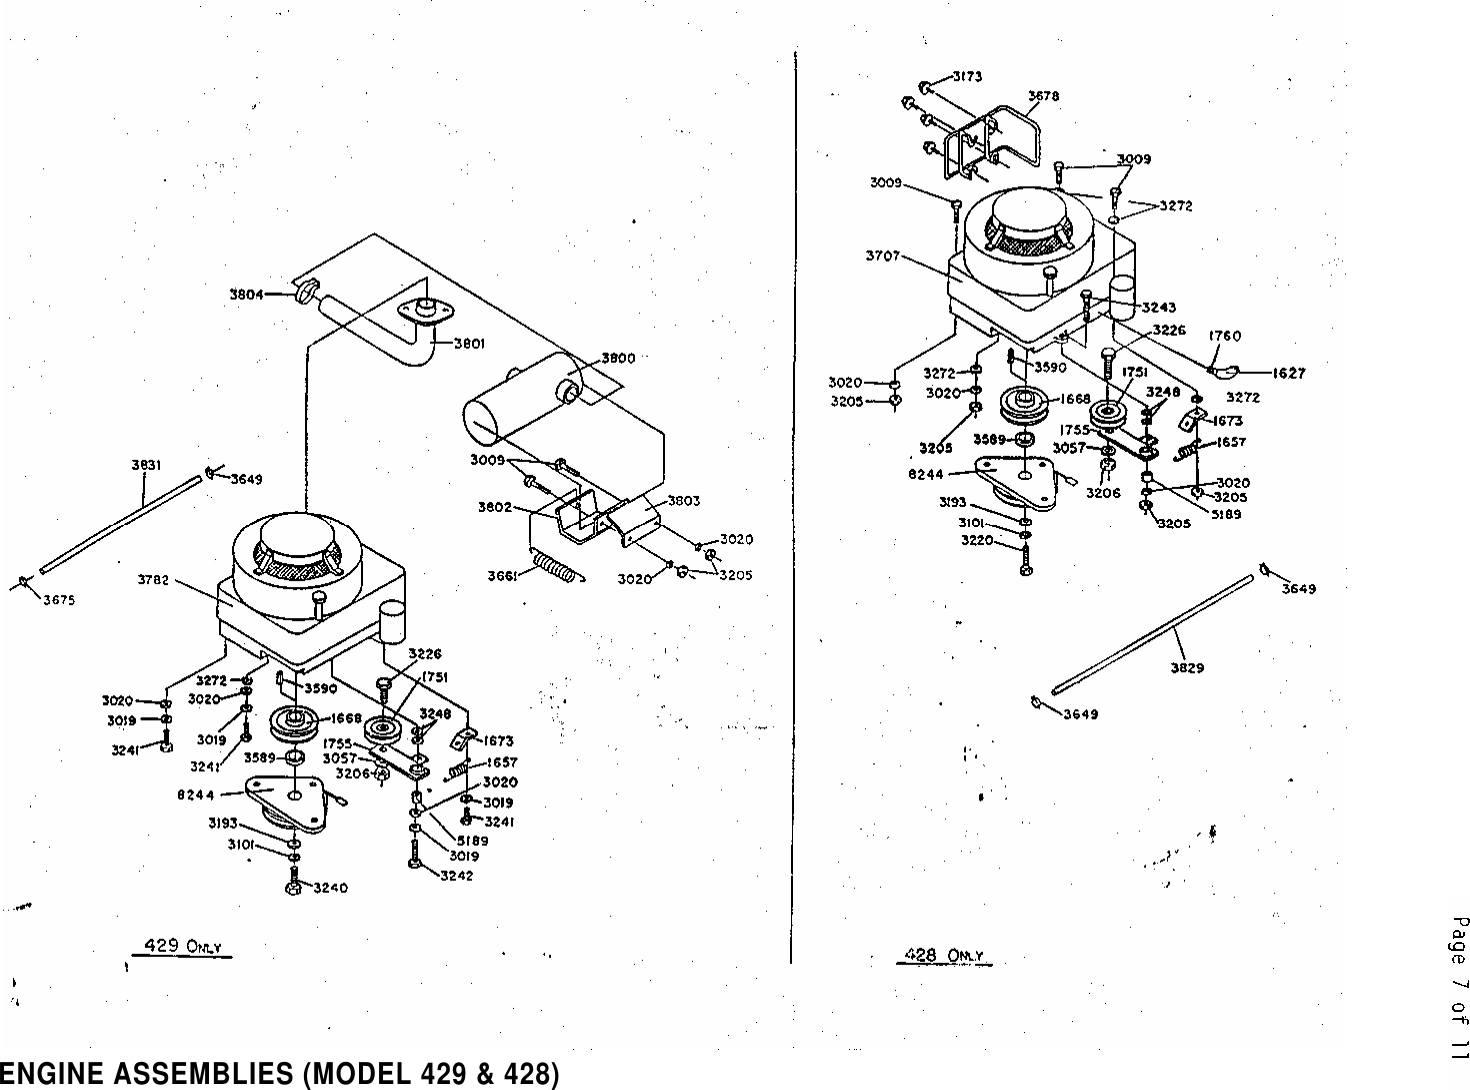 Page 4 of 6 - Dixon Dixon-Ztr-428-Users-Manual- 1990 Technical Data Brochure - ZTR 428 & 429  Dixon-ztr-428-users-manual